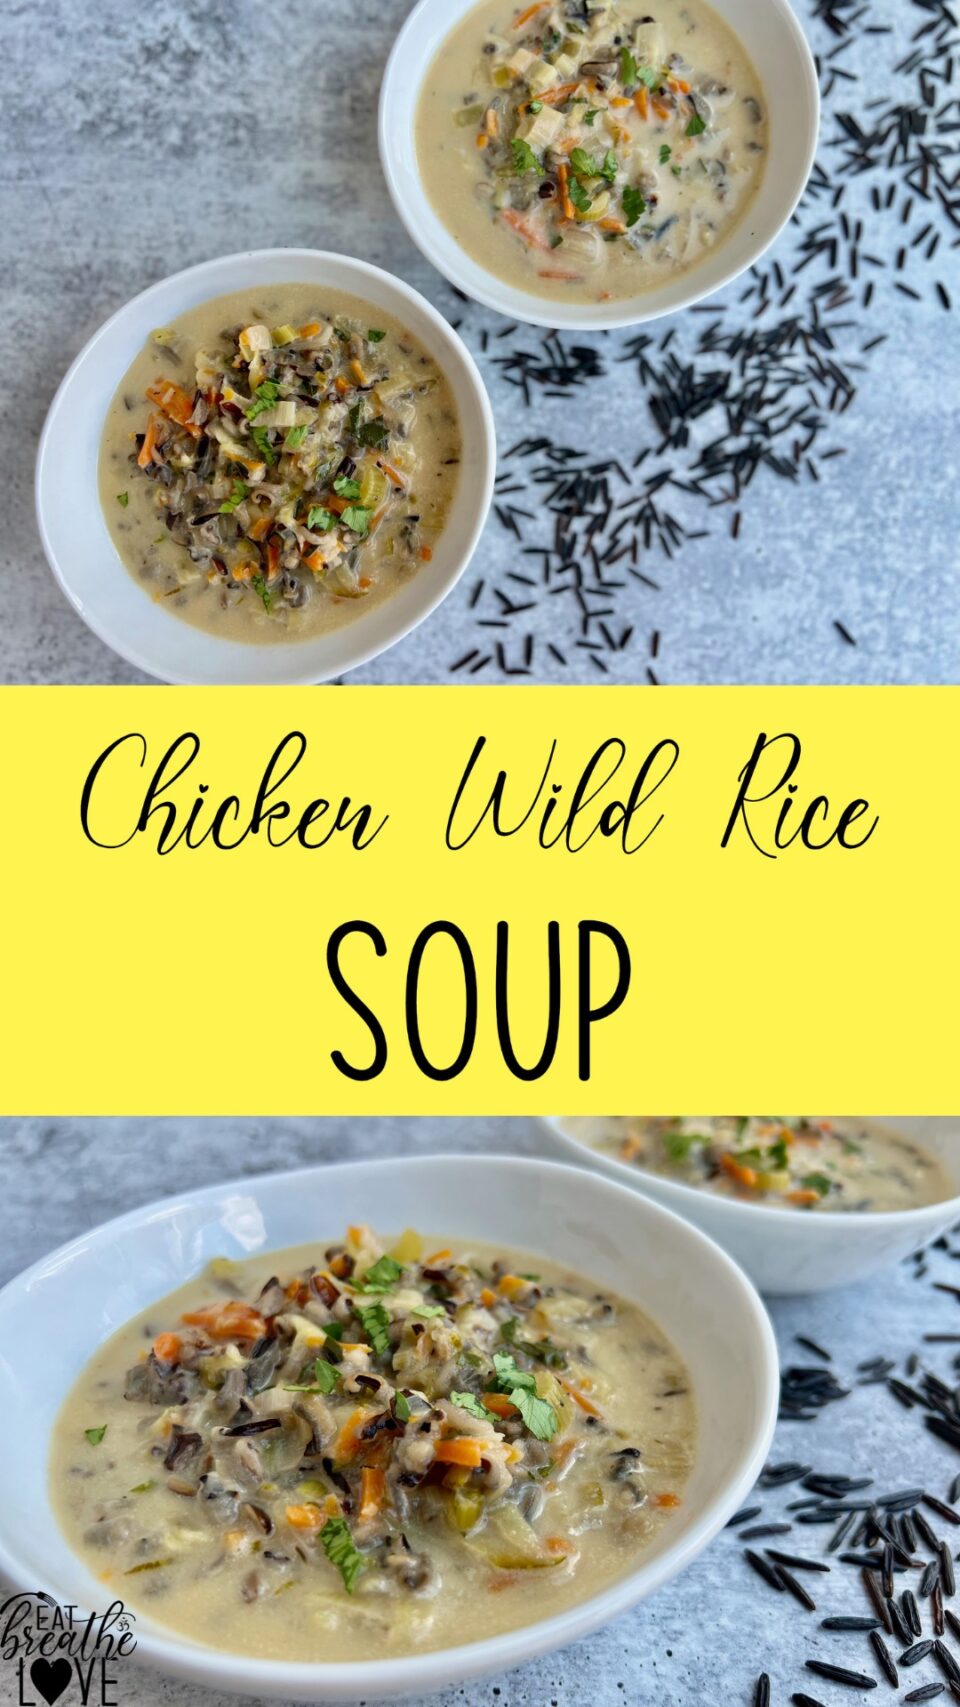 Pictures of bowls of chicken wild rice soup with wild rice around it